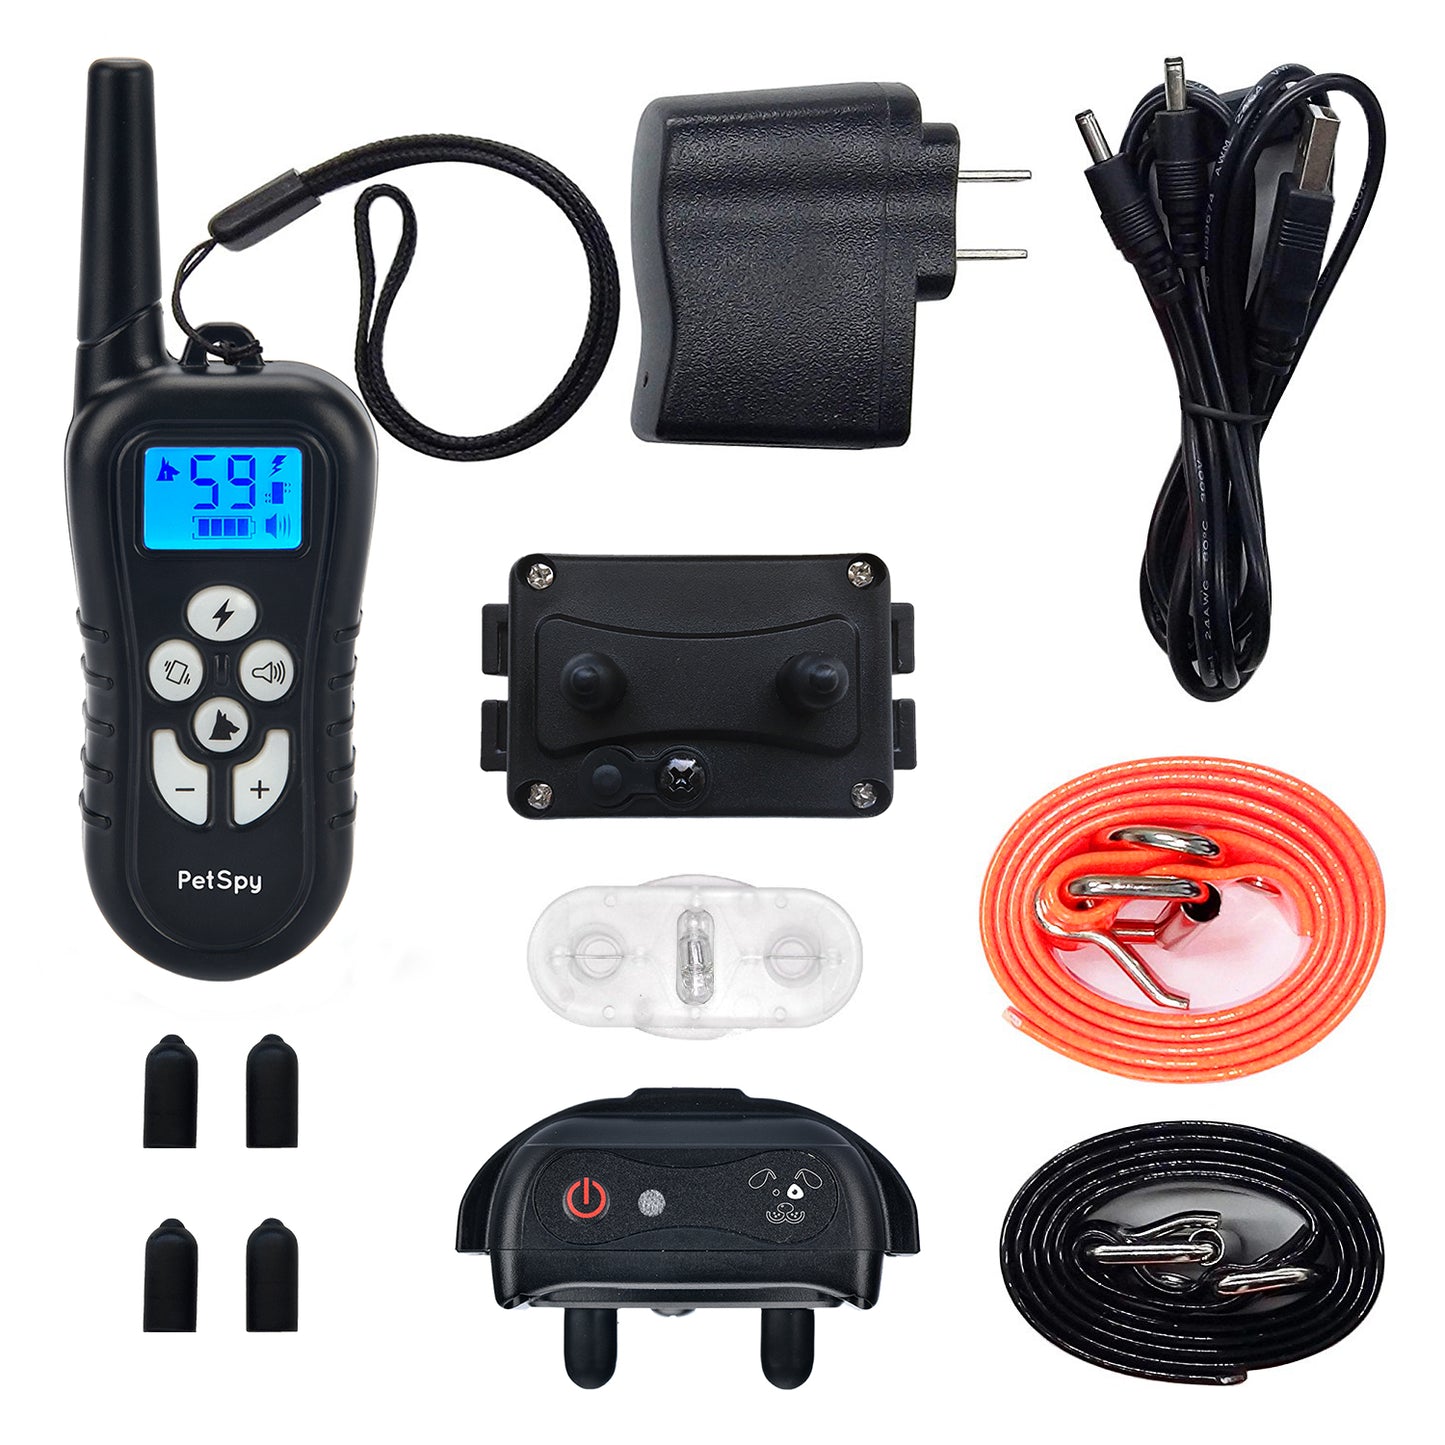  Included_Remote Transmitter_Collar Receivers_Adjustable TPU Straps_Dual USB Charger_Test Light and User Guide